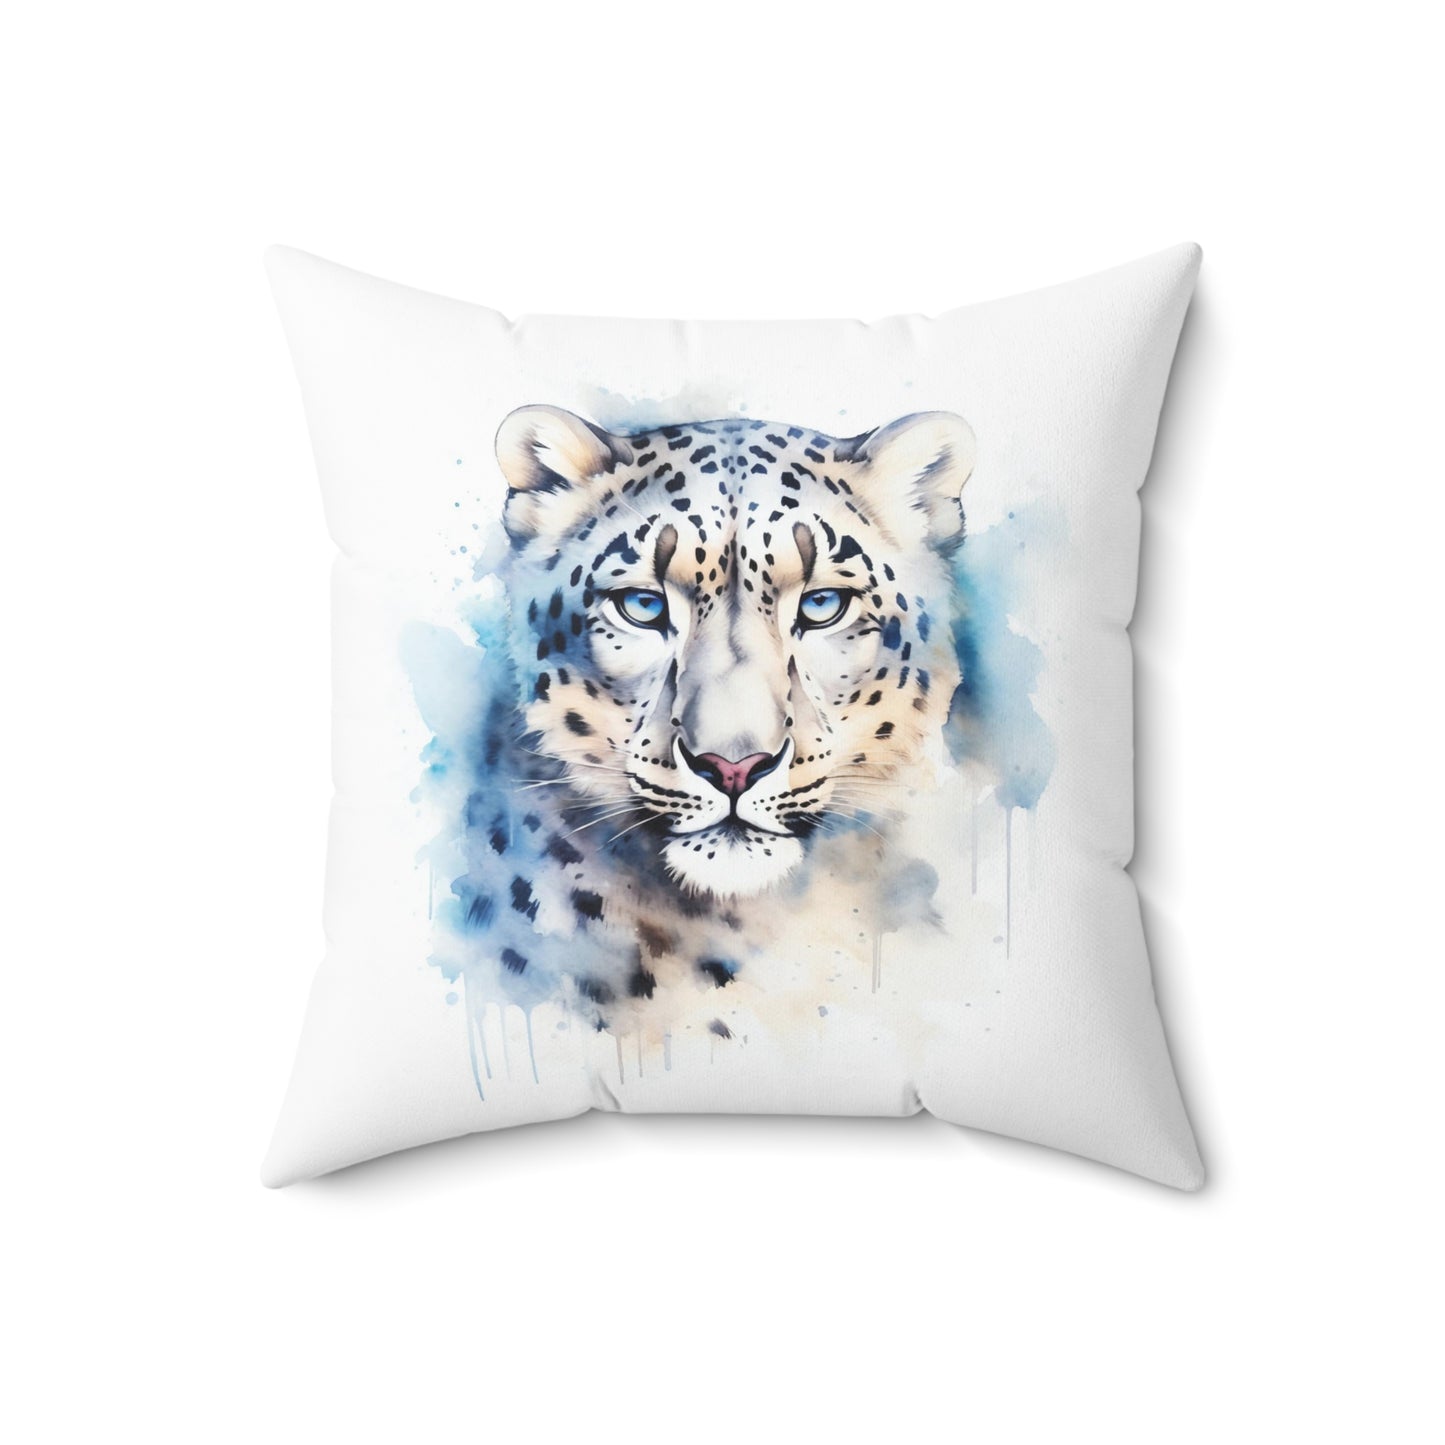 Snow Leopard Throw Pillow, Watercolor Snow Leopard Decorative Pillow, Square Animal Cushion, Double Sided Accent Pillow, Concealed Zipper